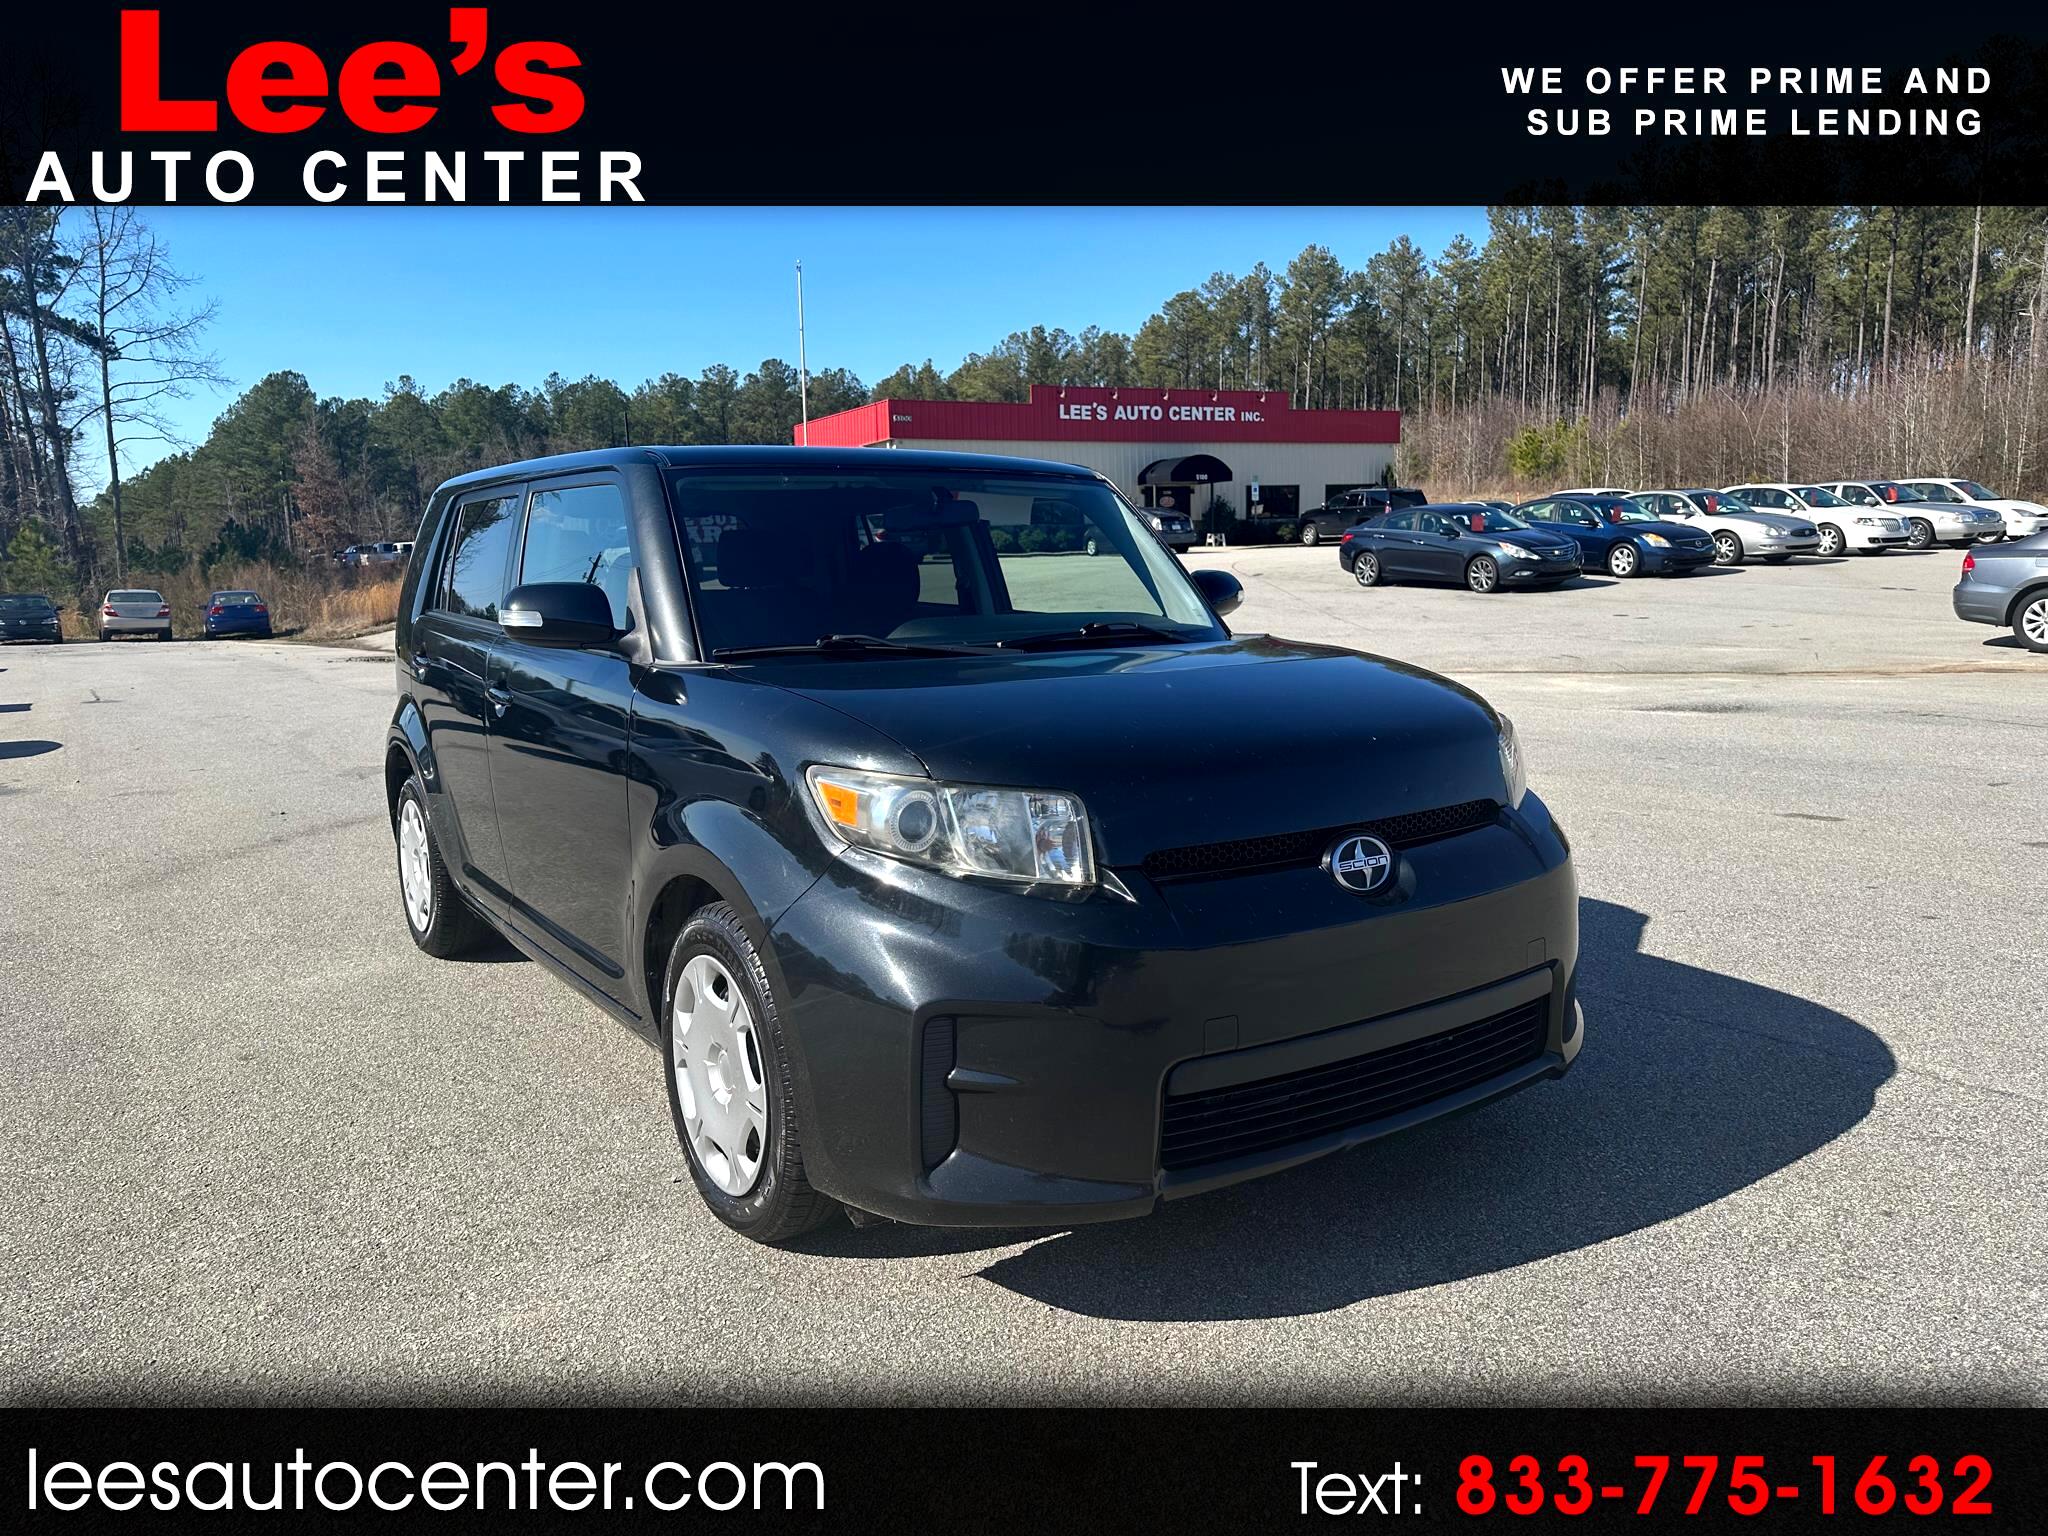 Used Cars for Sale Raleigh NC 27603 Lee's Auto Center